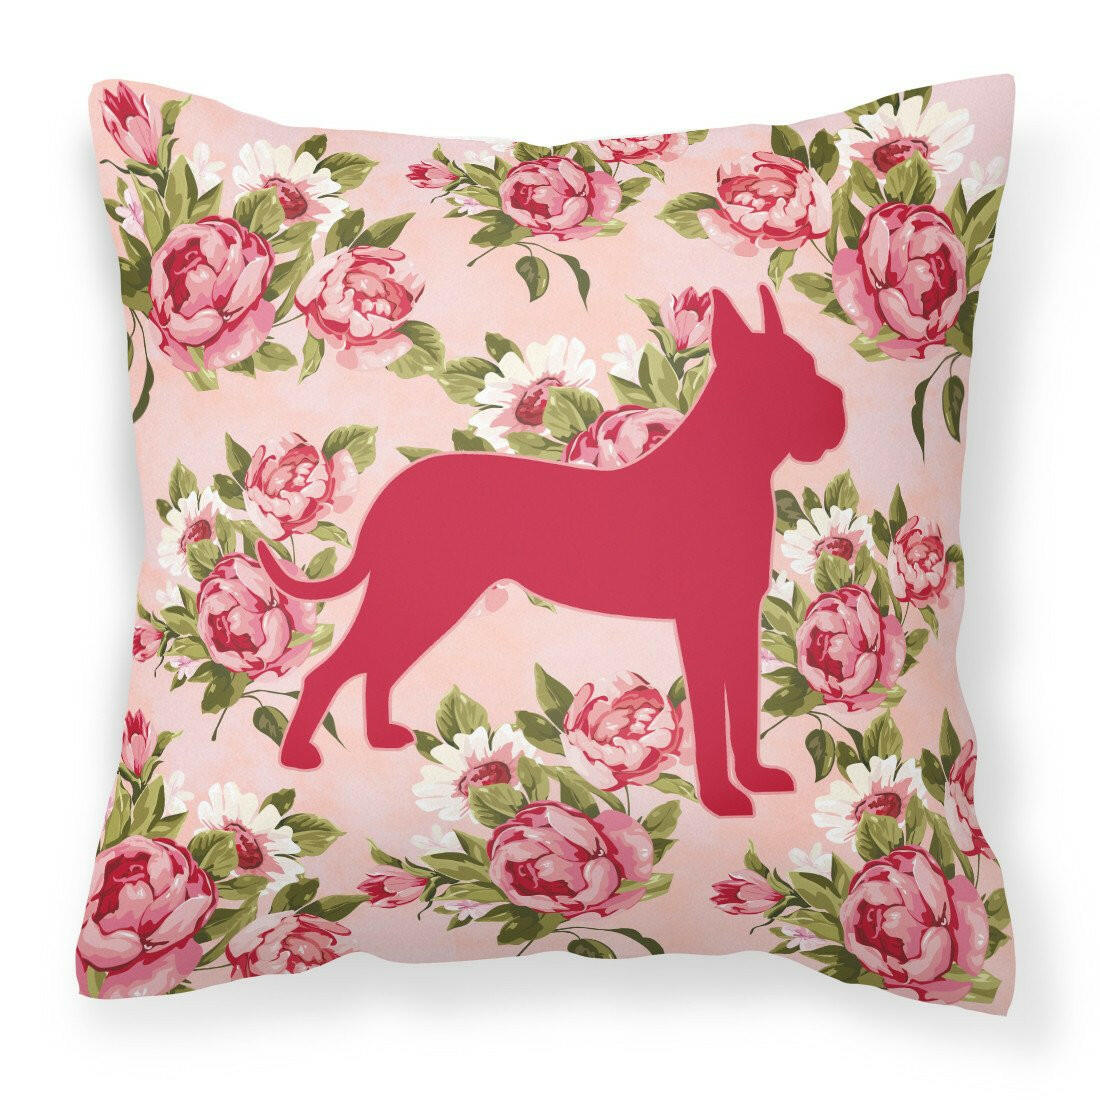 Boxer Shabby Chic Pink Roses  Fabric Decorative Pillow BB1109-RS-PK-PW1414 - the-store.com